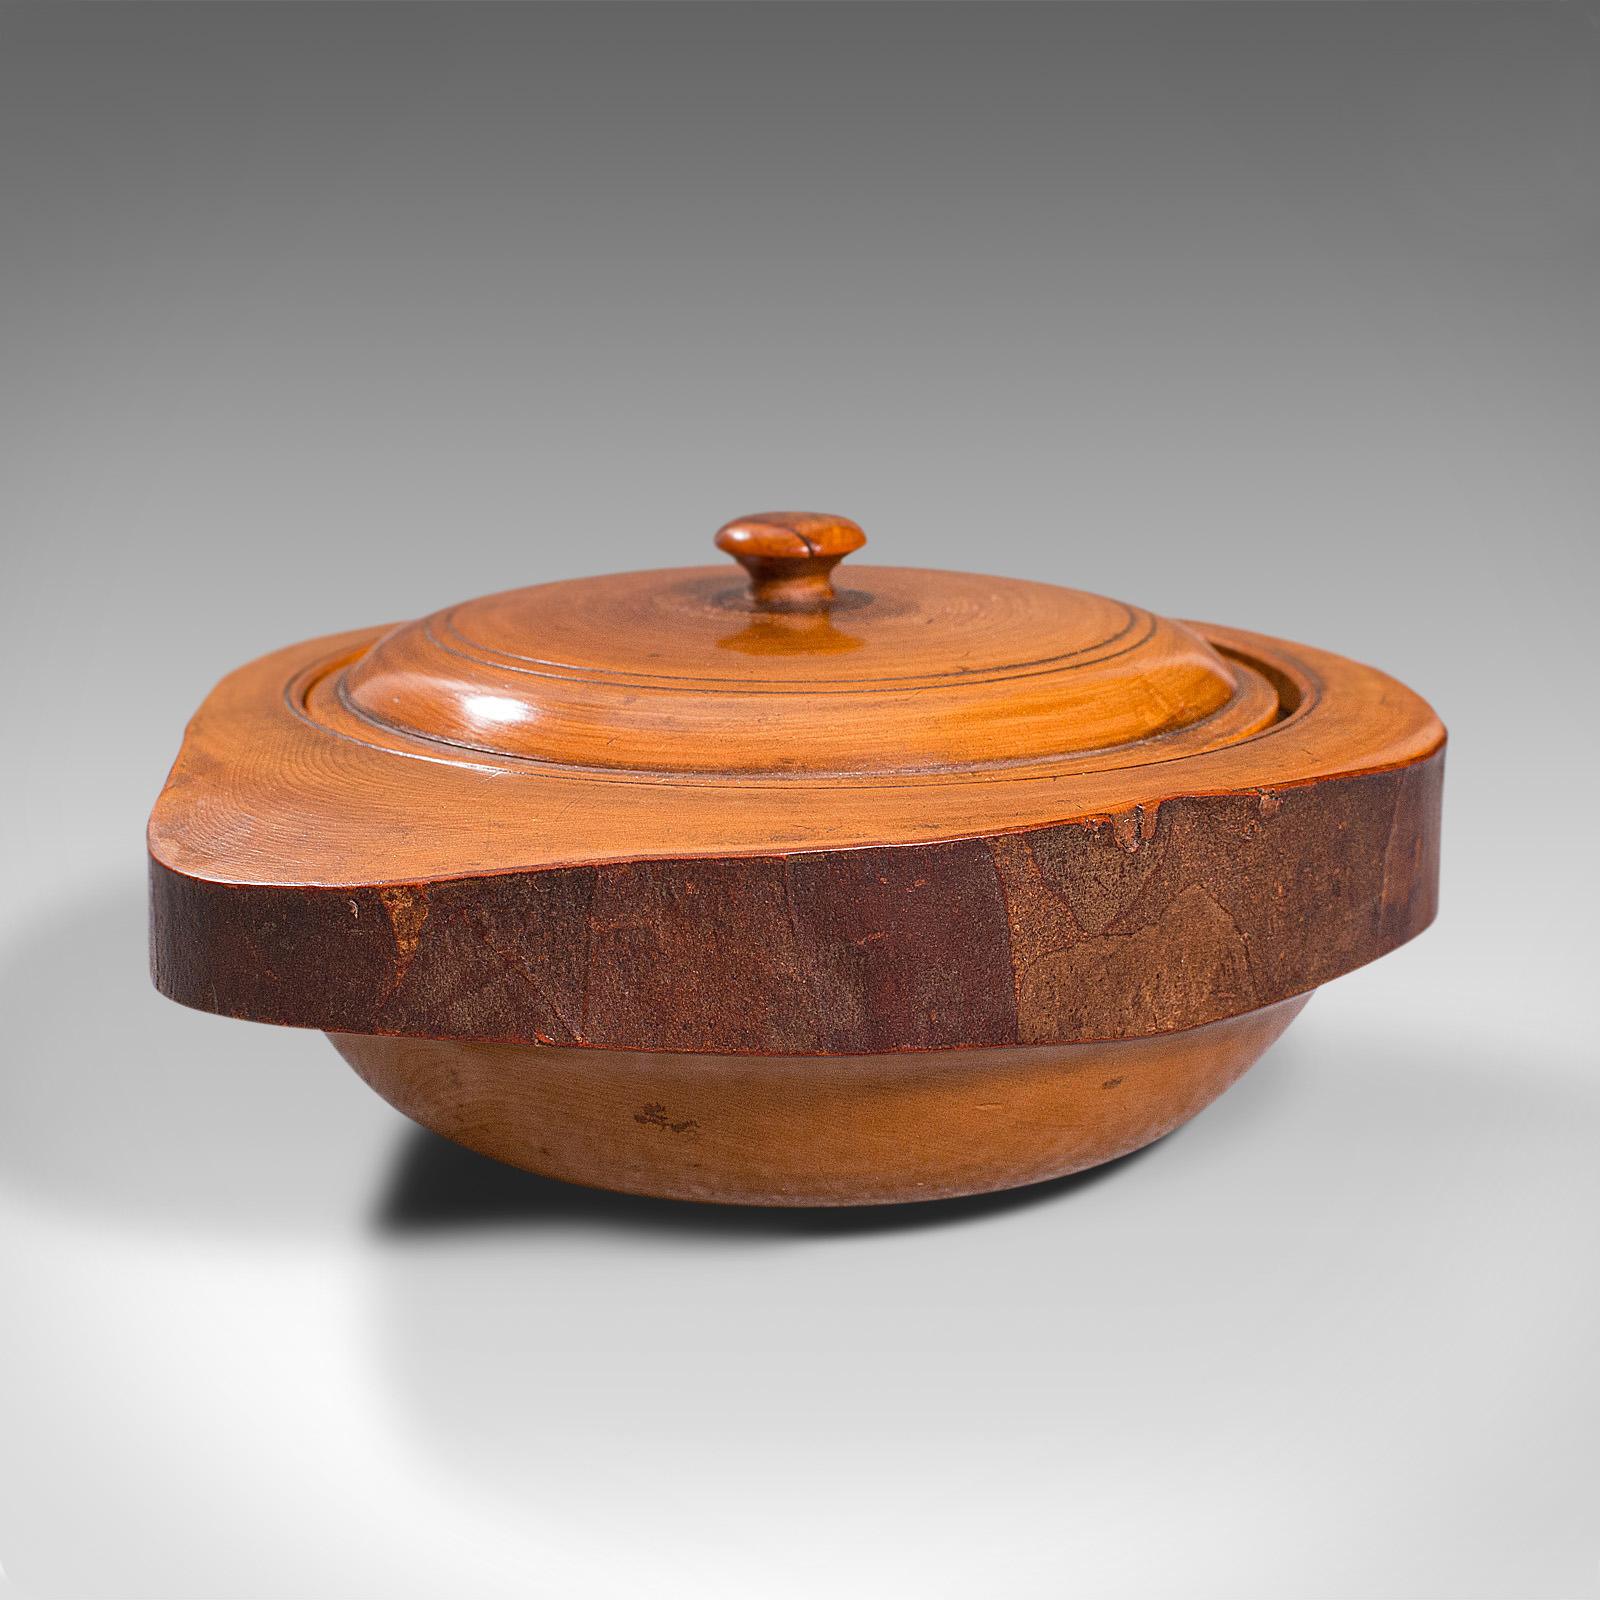 Pair of Antique Carved Lidded Bowls, Treen, English, Yew, Victorian, circa 1900 For Sale 1